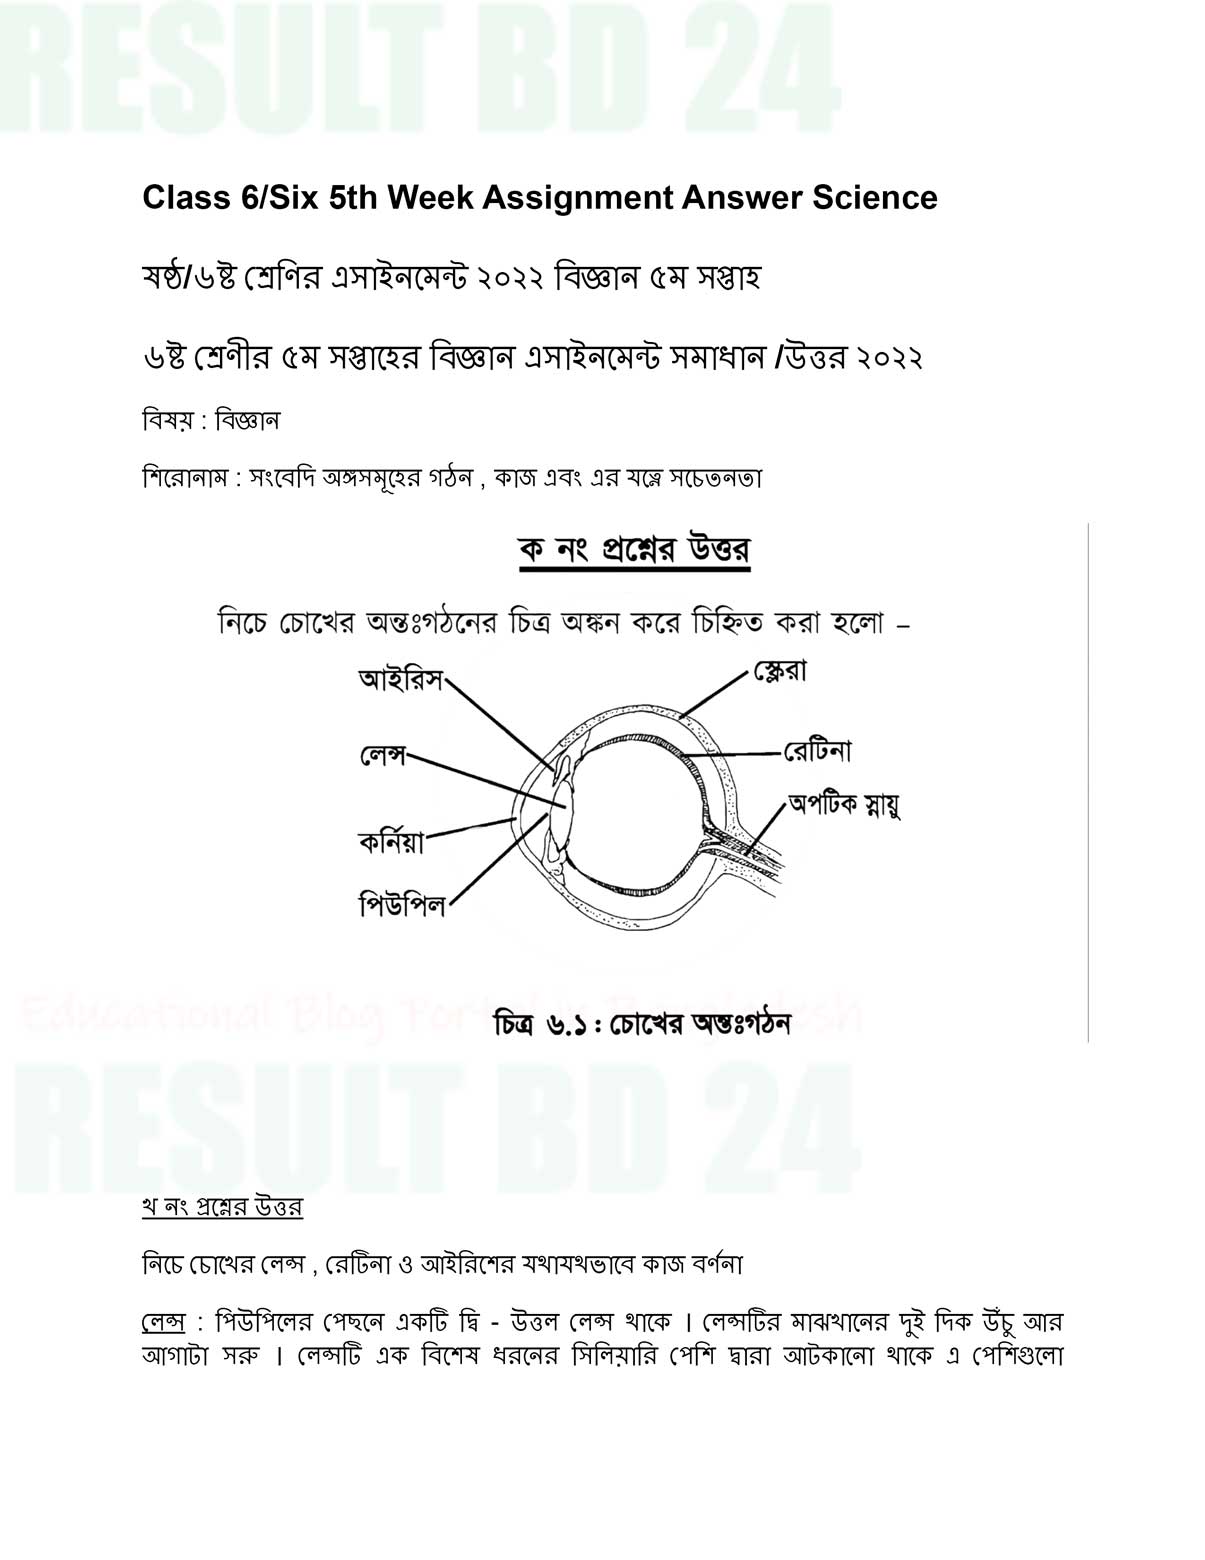 01 3 Class 6 5th Week Assignment Answer 2022 Math, Science